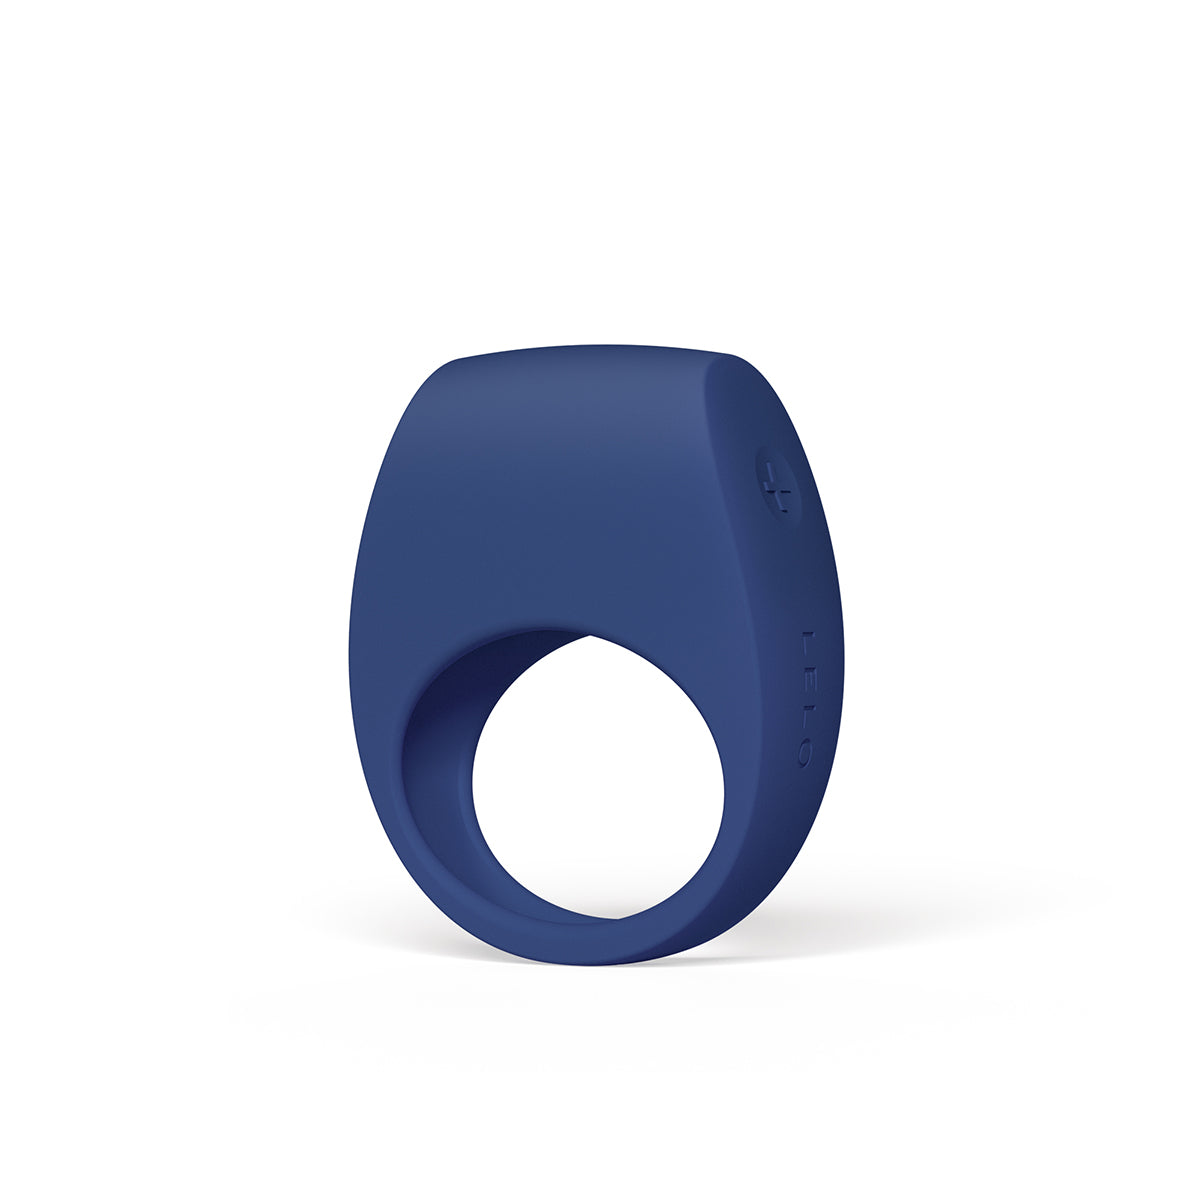 LELO Tor 3 App-Controlled Cock Ring